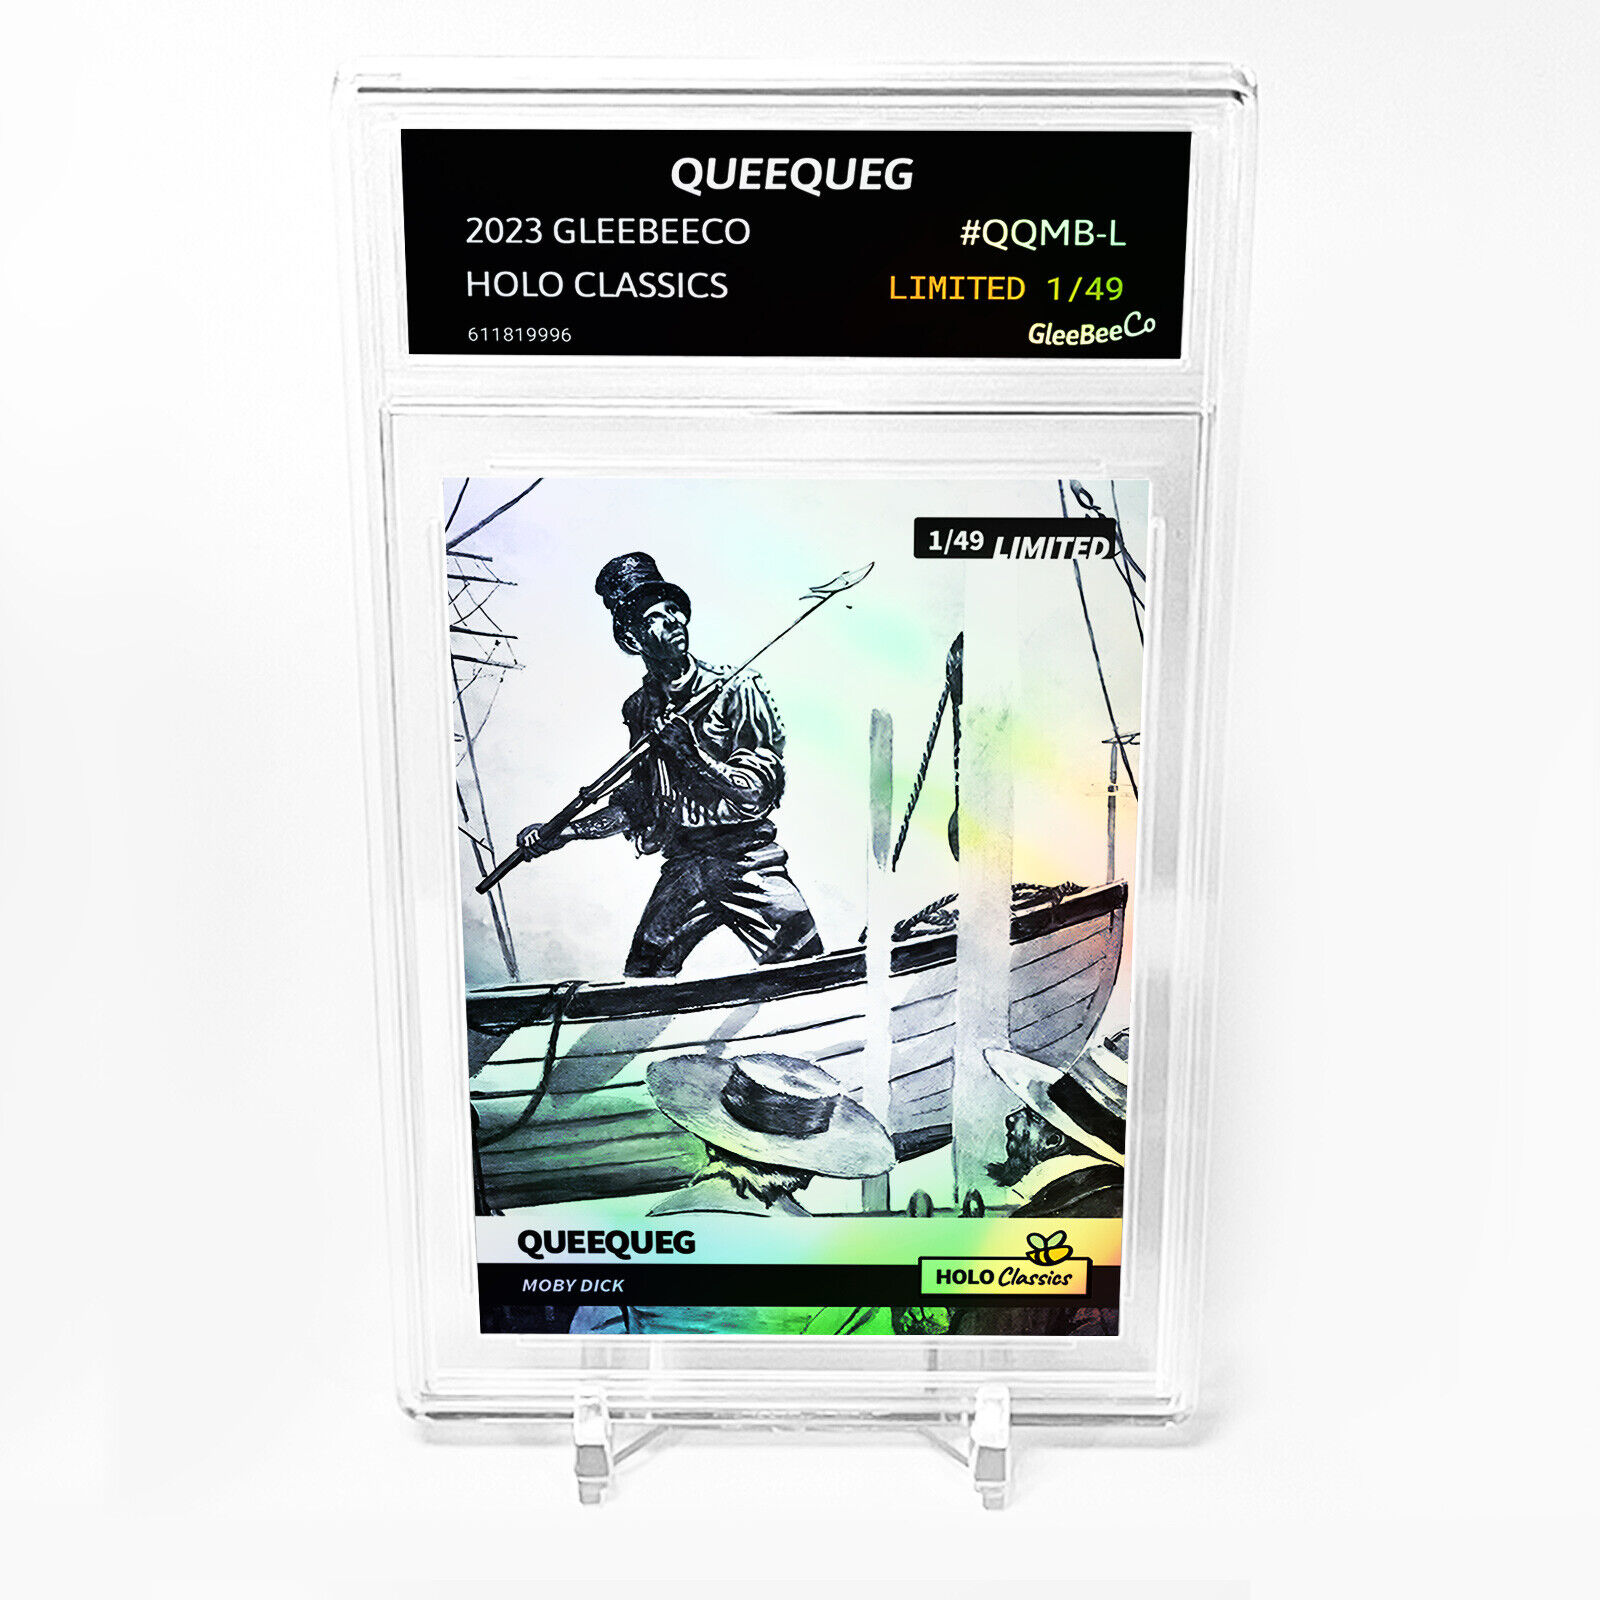 QUEEQUEG Moby Dick Card 2023 GleeBeeCo Holographic #QQMB-L /49 - Unbelievable